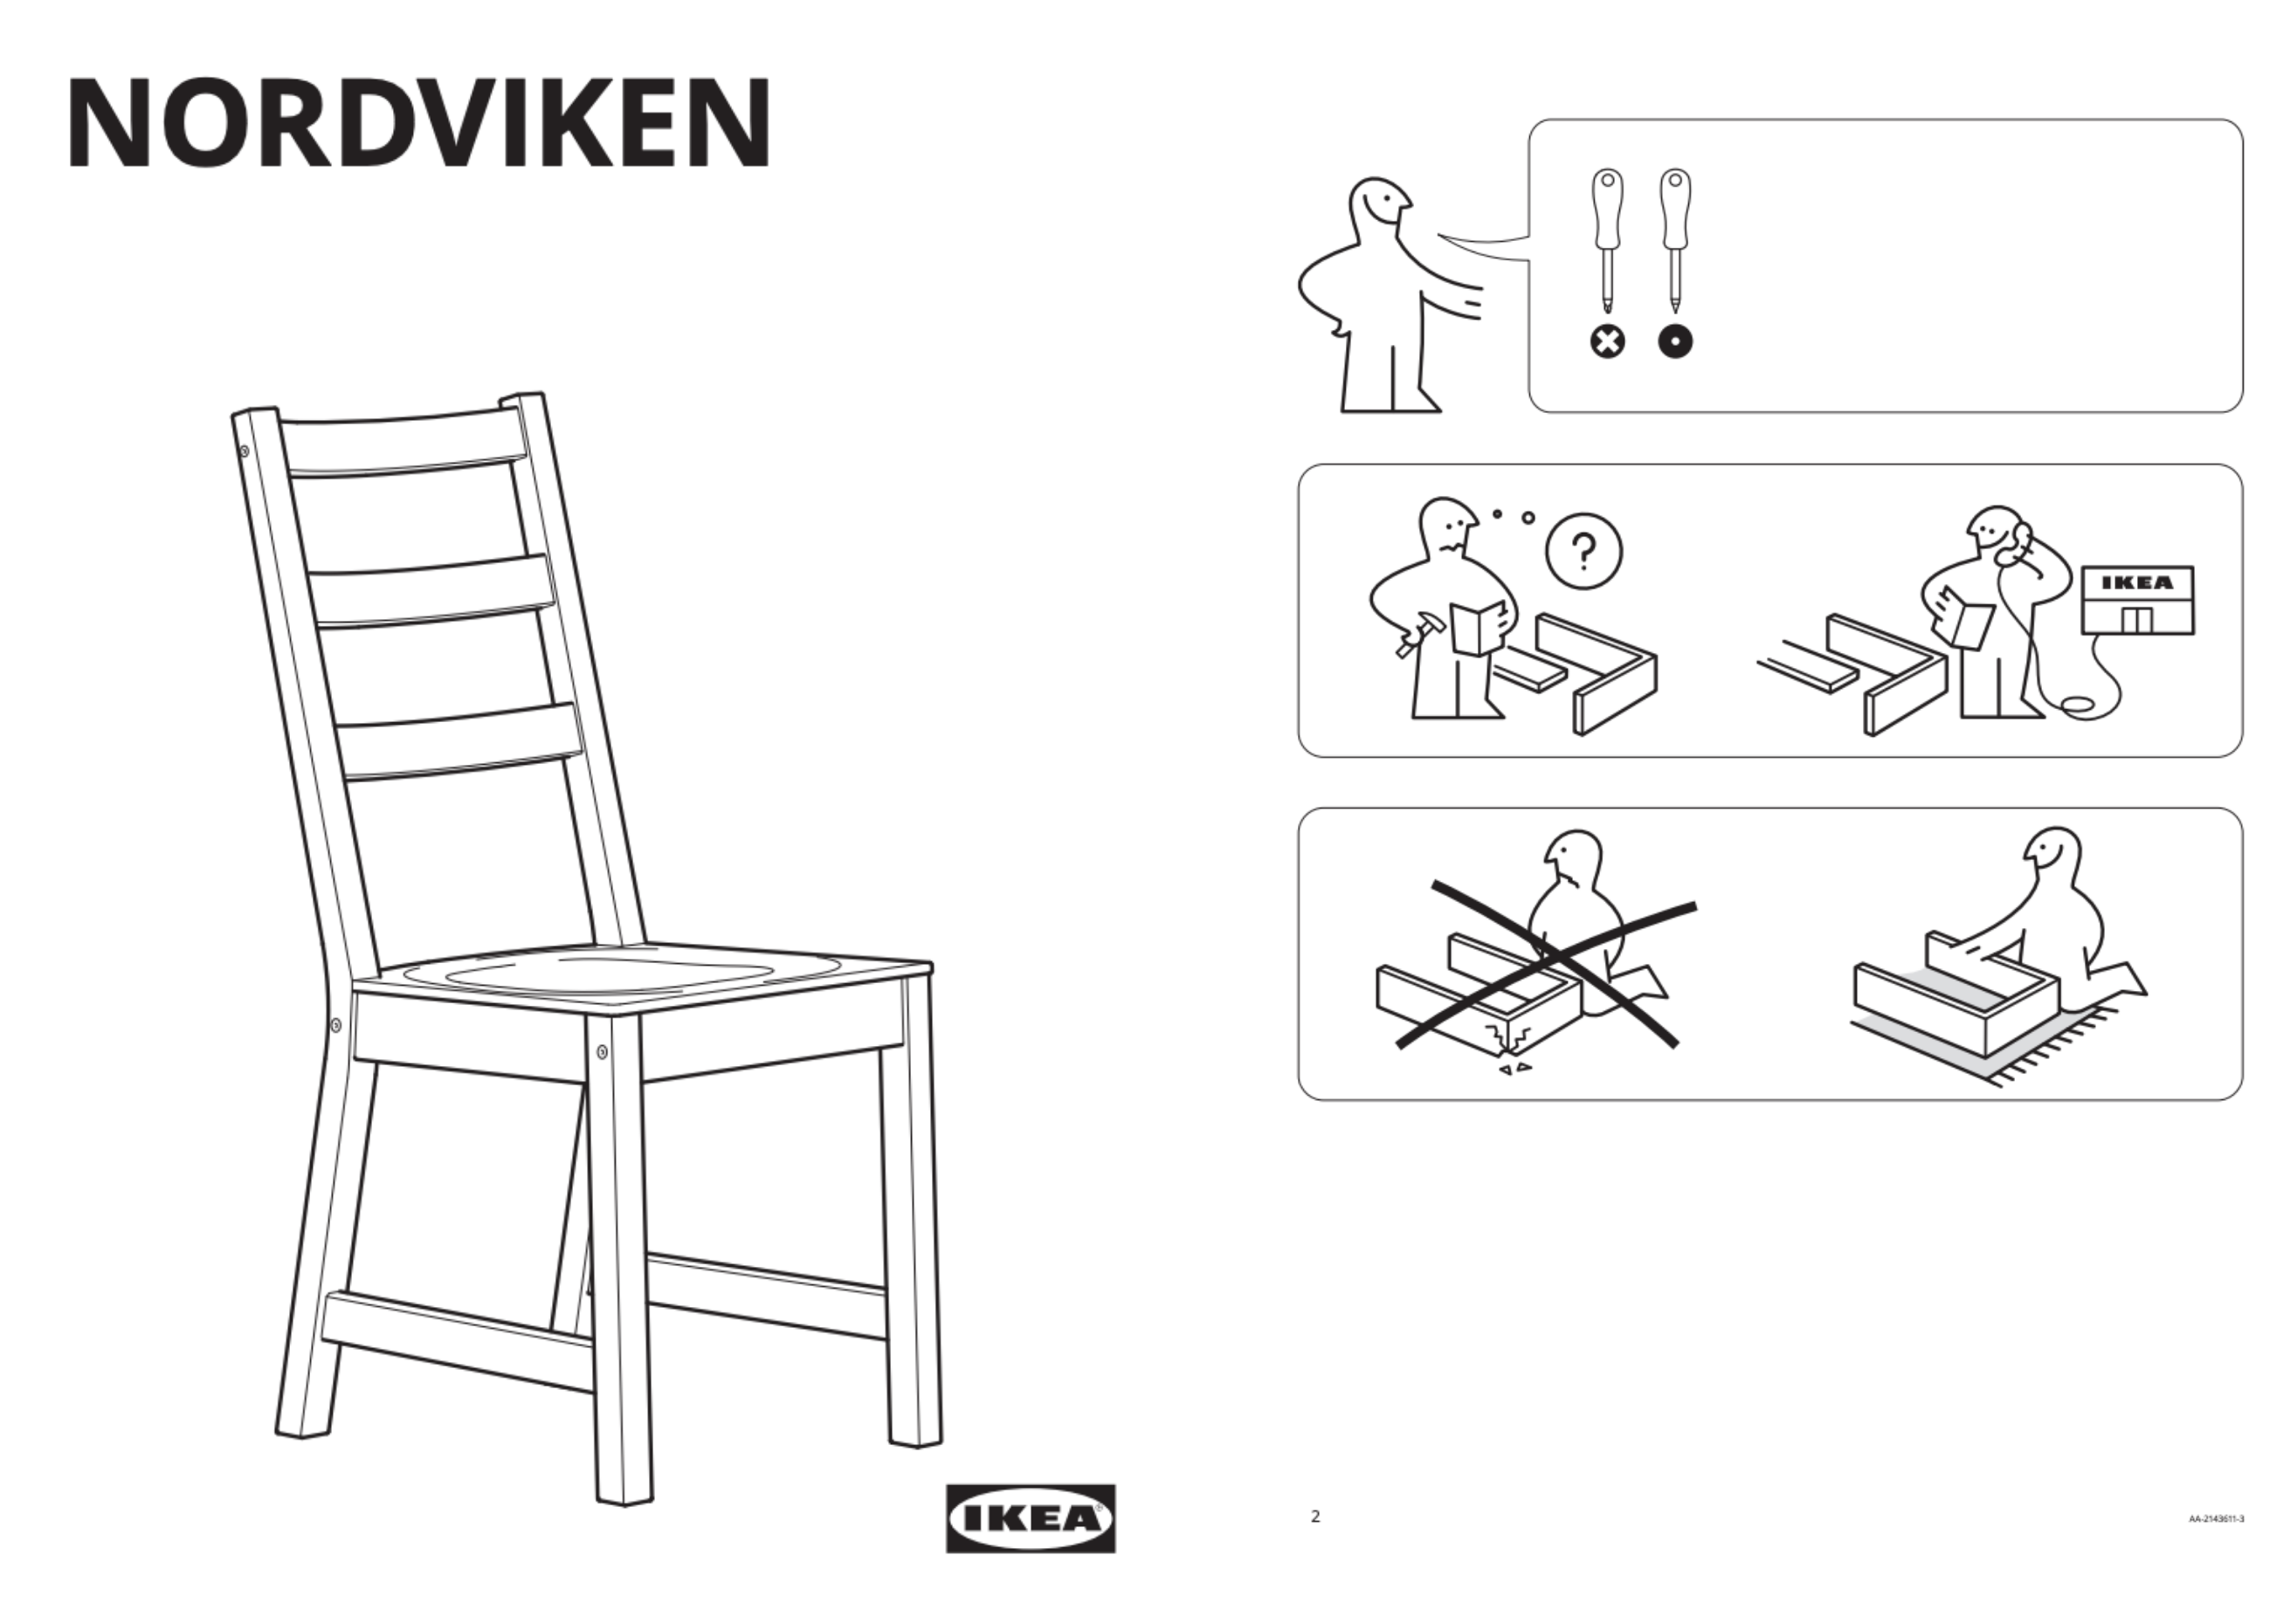 a screenshot
              of a file from Ikea's instructions